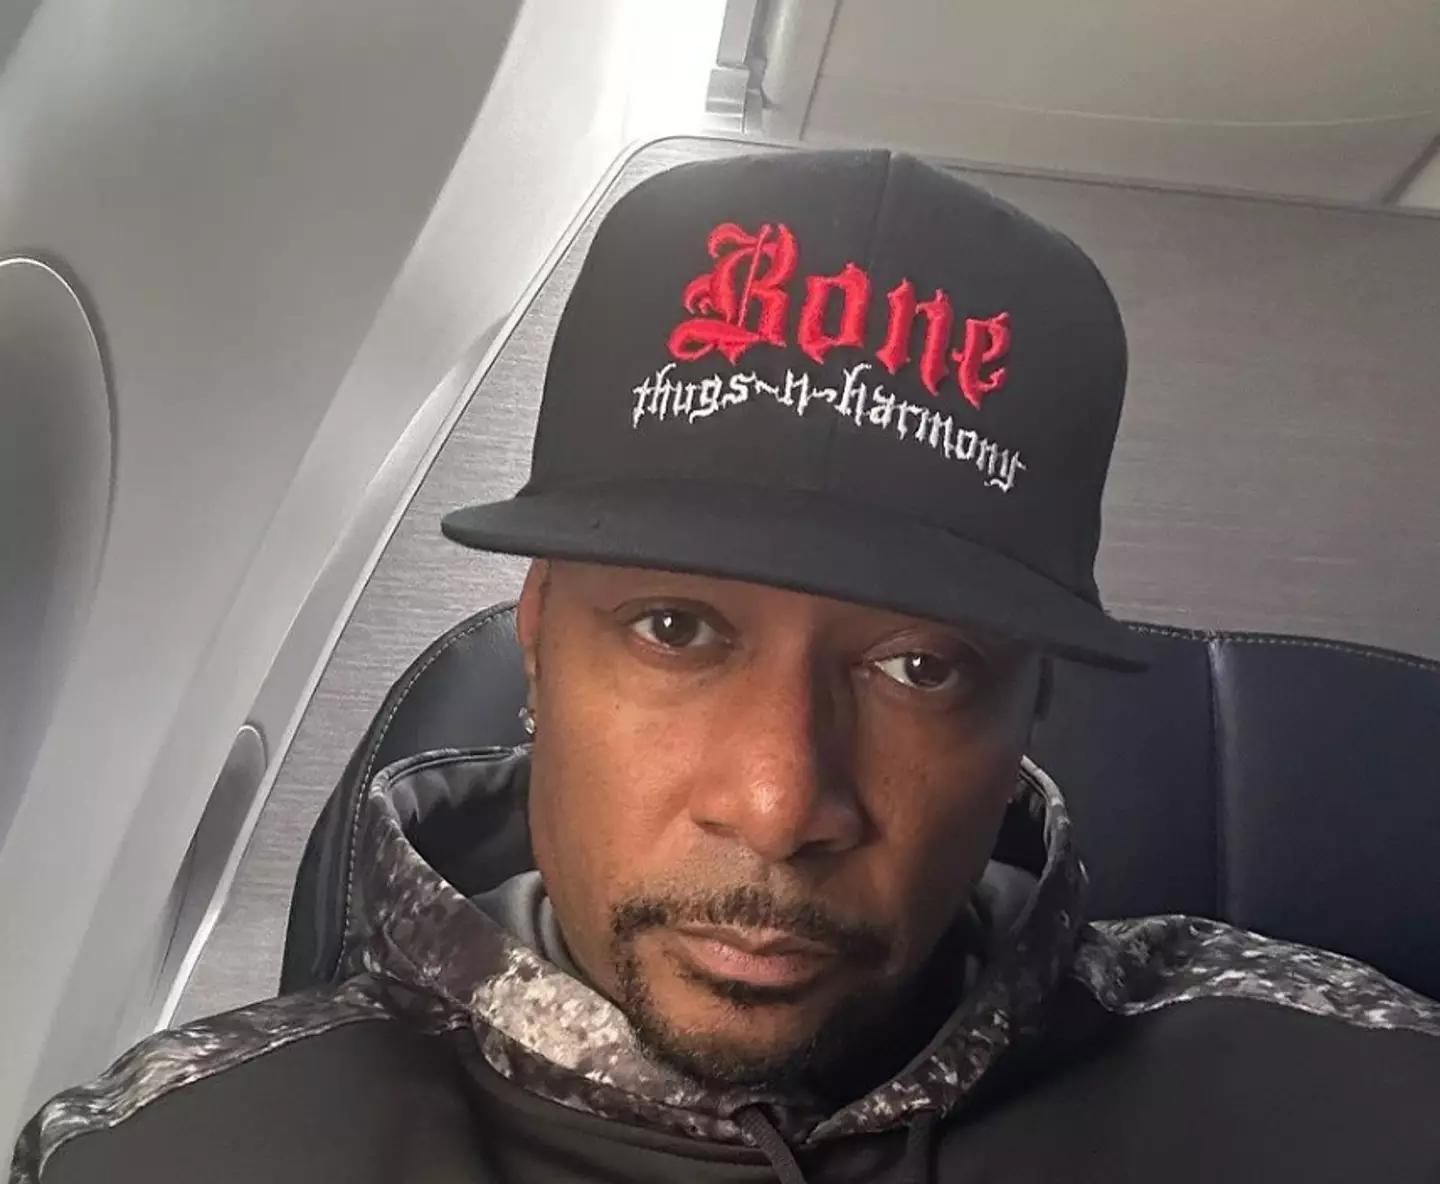 Krayzie Bone was admitted to hospital in September.